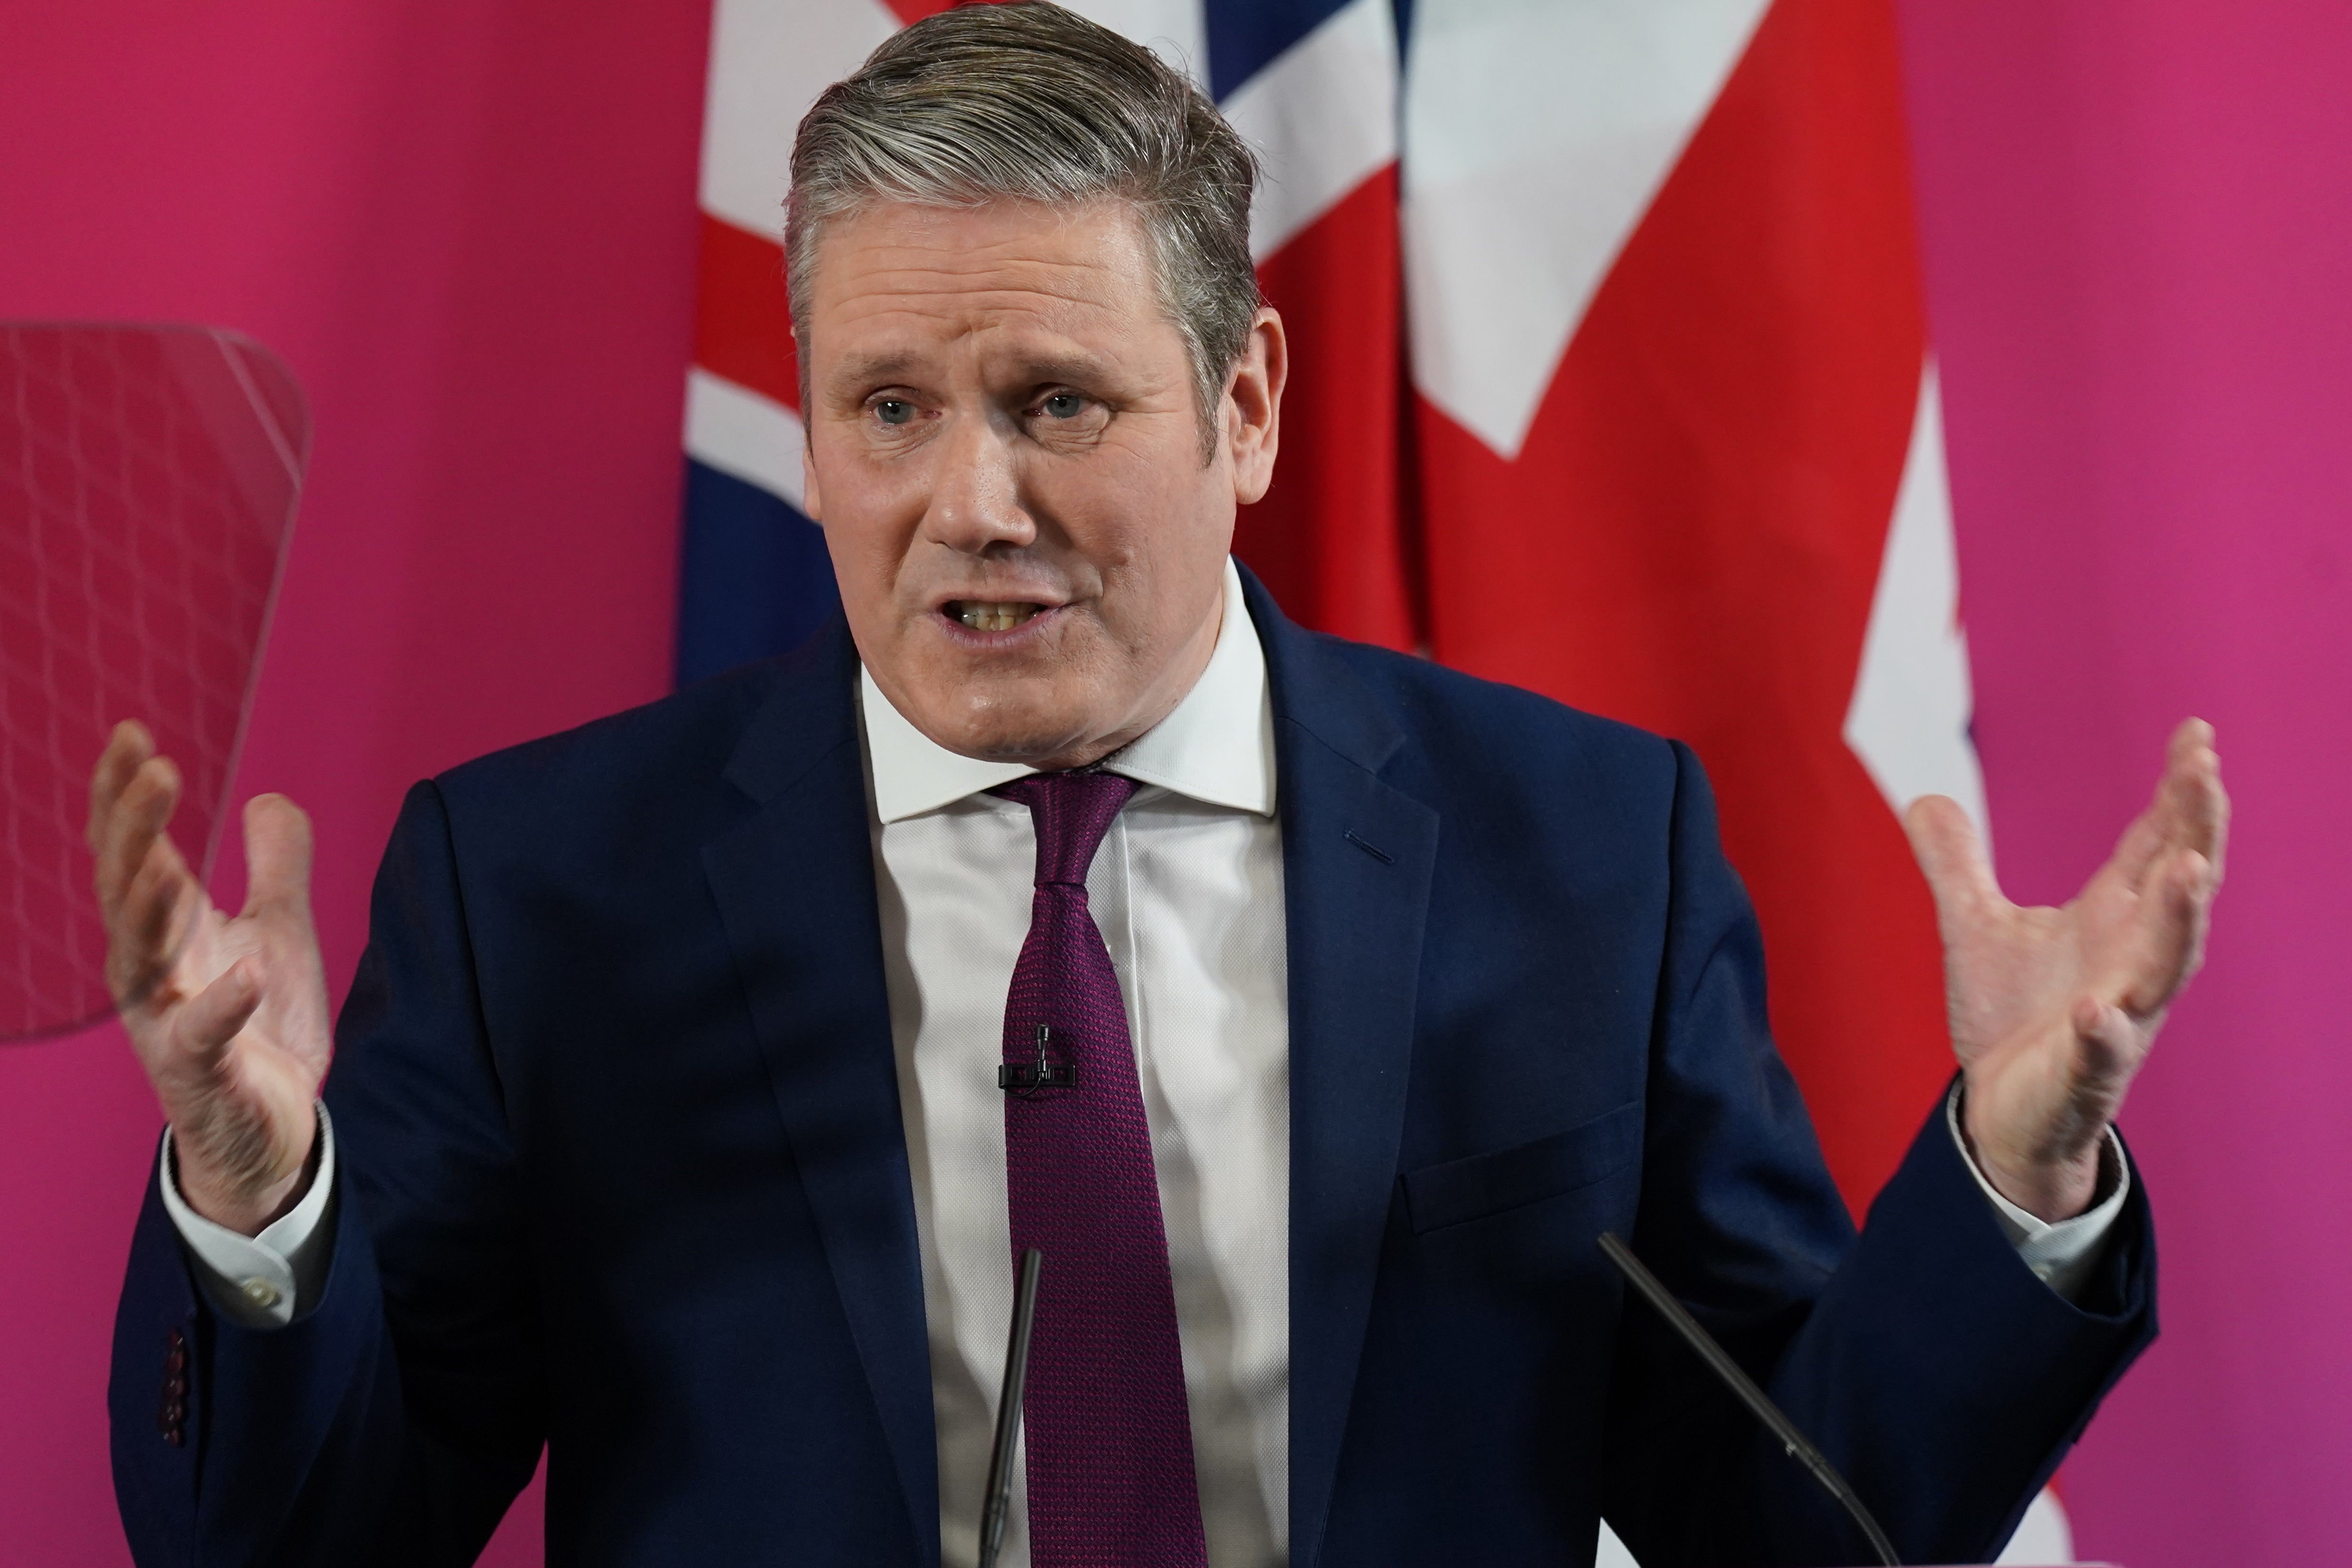 Starmer against changing drug laws as London considers reducing cannabis arrests The Independent photo